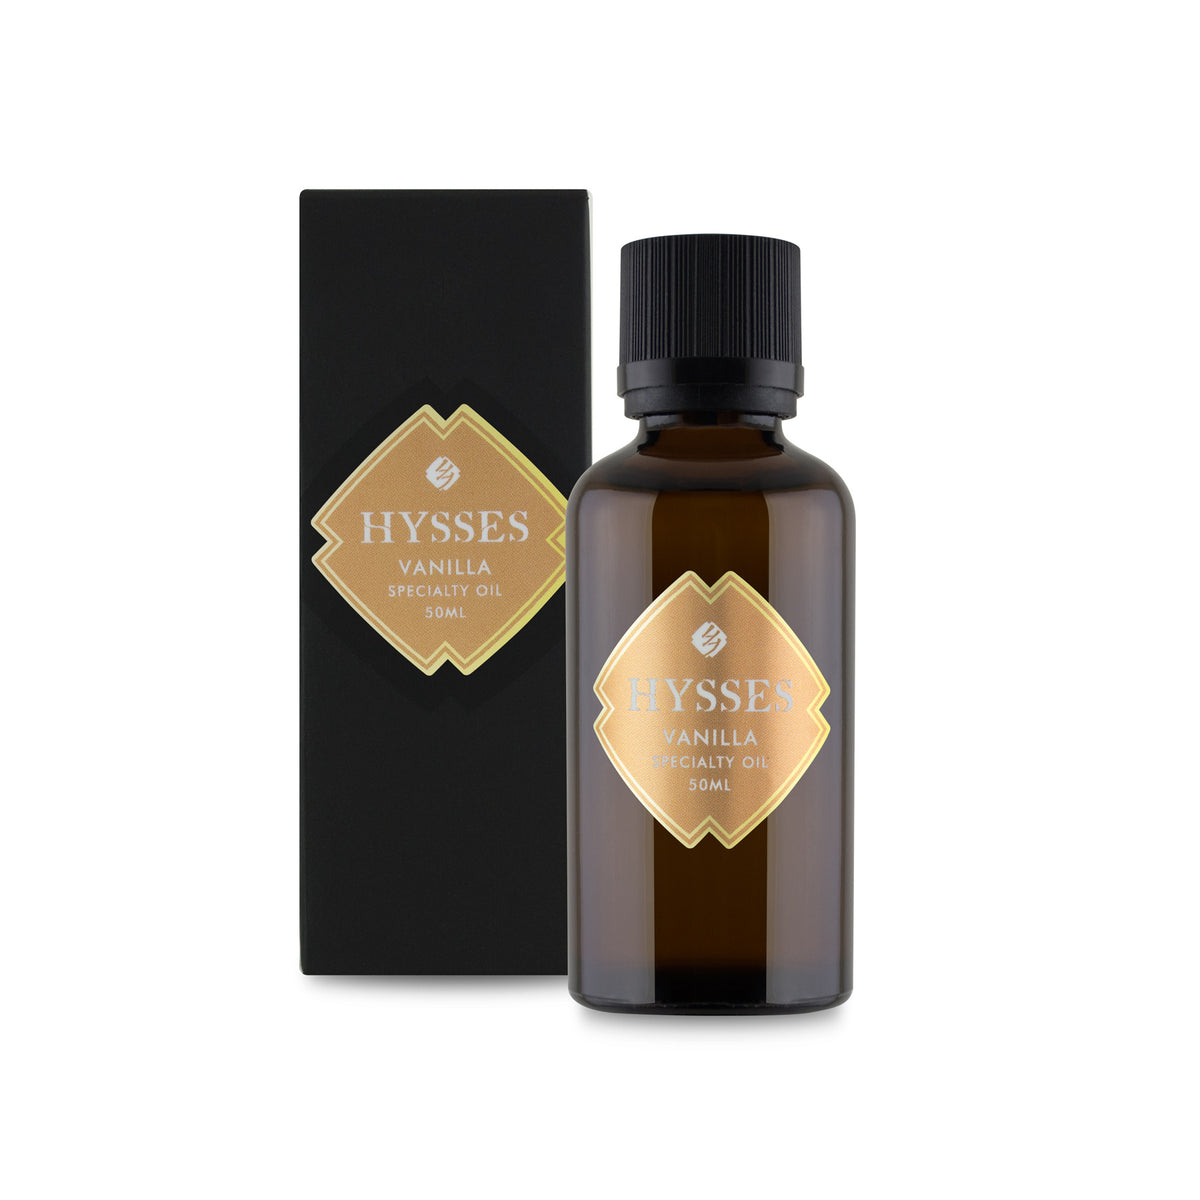 Vanilla Absolute (30%) Specialty Oil - HYSSES